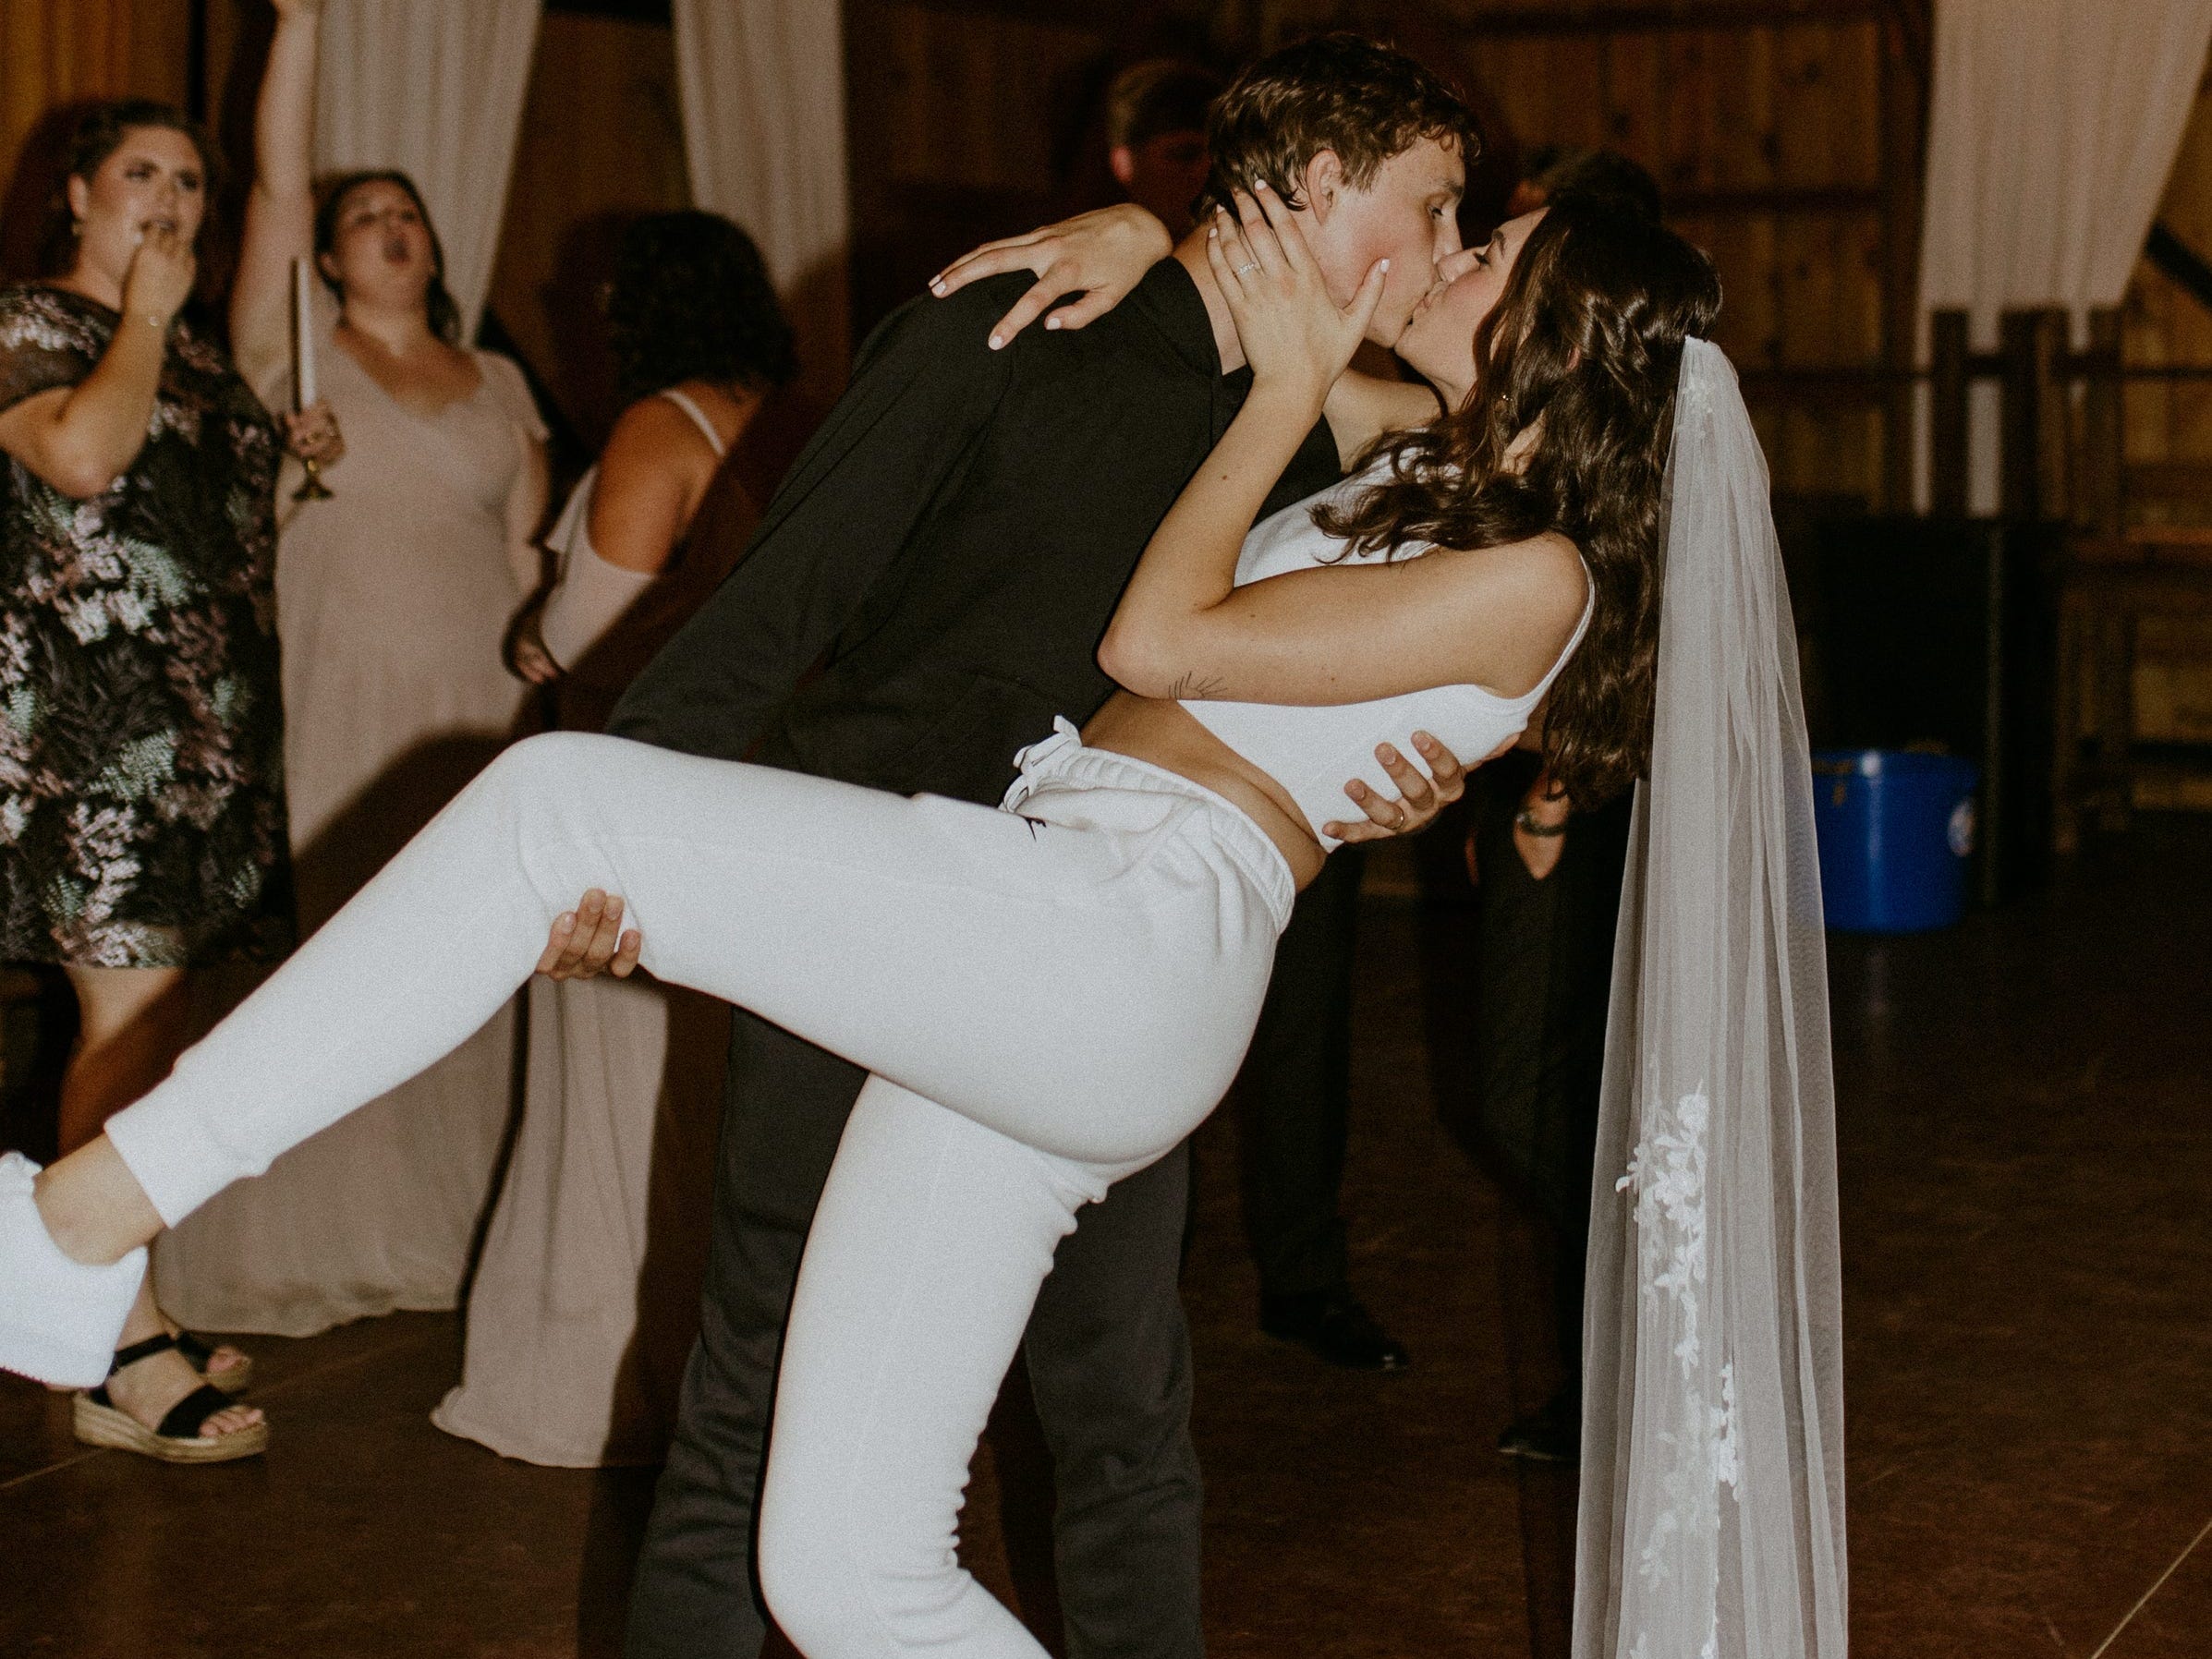 Alayna and Gunner Tripp are photographed wearing coordinating Nike sweat suits at their wedding reception.